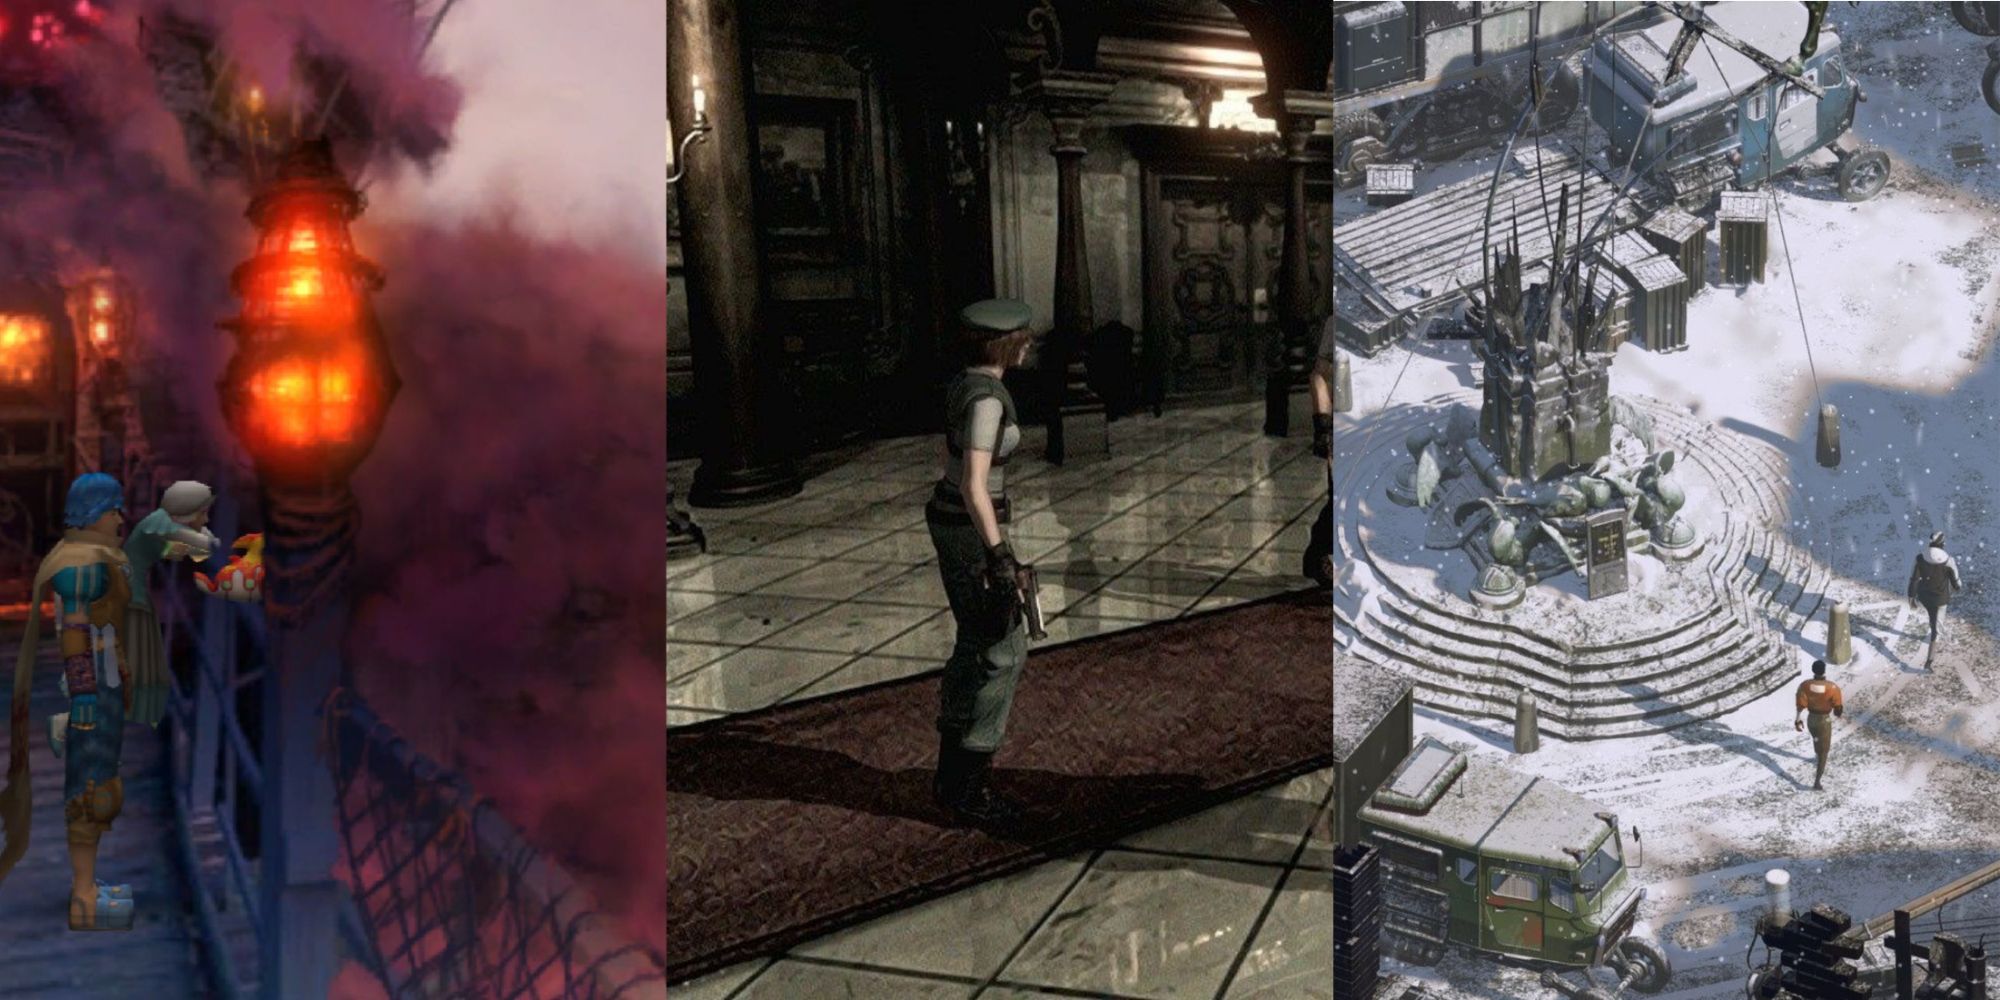 split image of Baten Kaitos background with 2 characters on a bridge, Jill in the Spencer Manor in Resident Evil 1, Snowy background from Disco Elysium, left to right